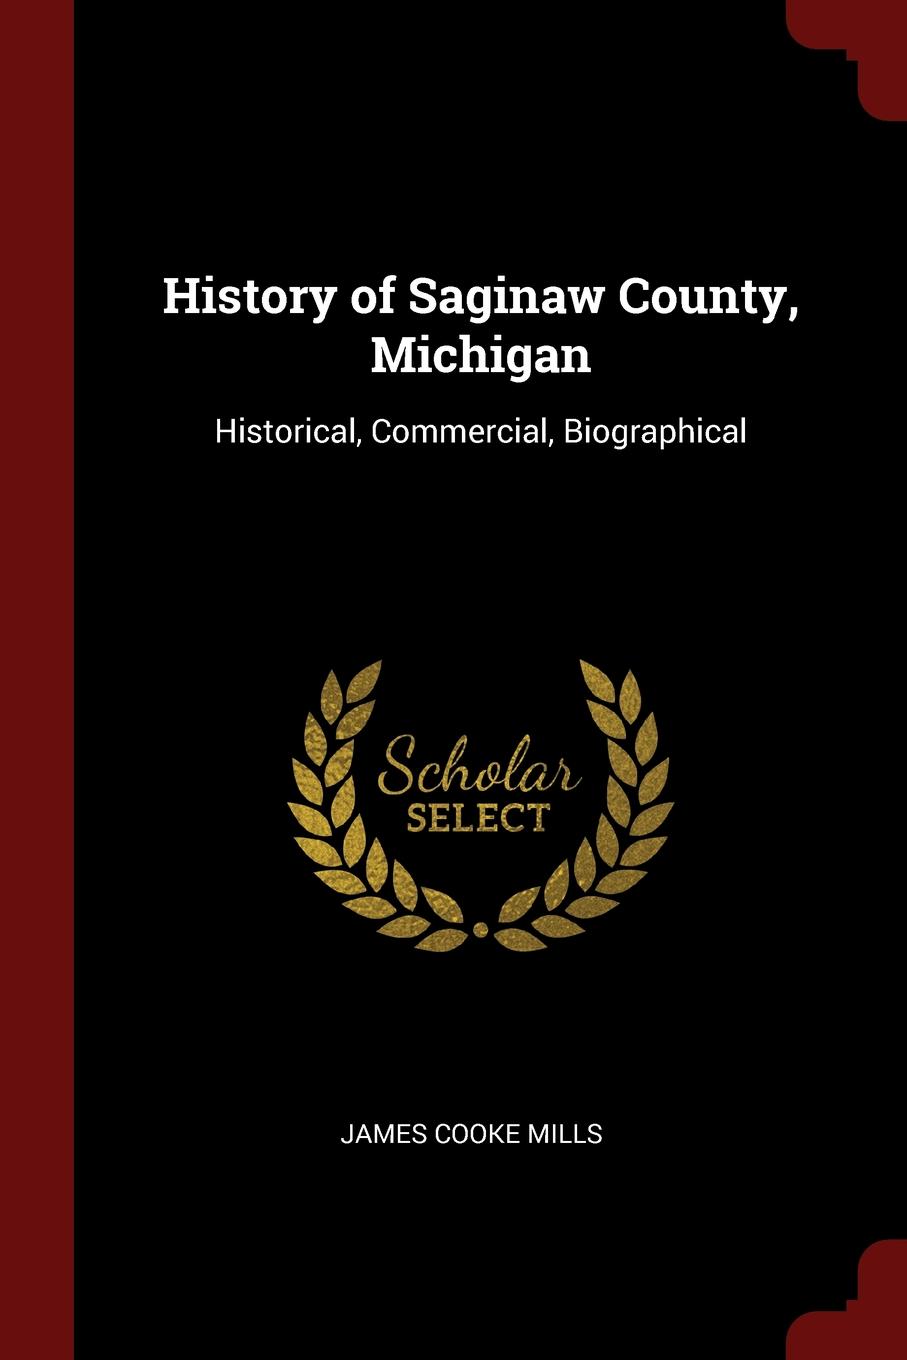 History of Saginaw County, Michigan. Historical, Commercial, Biographical